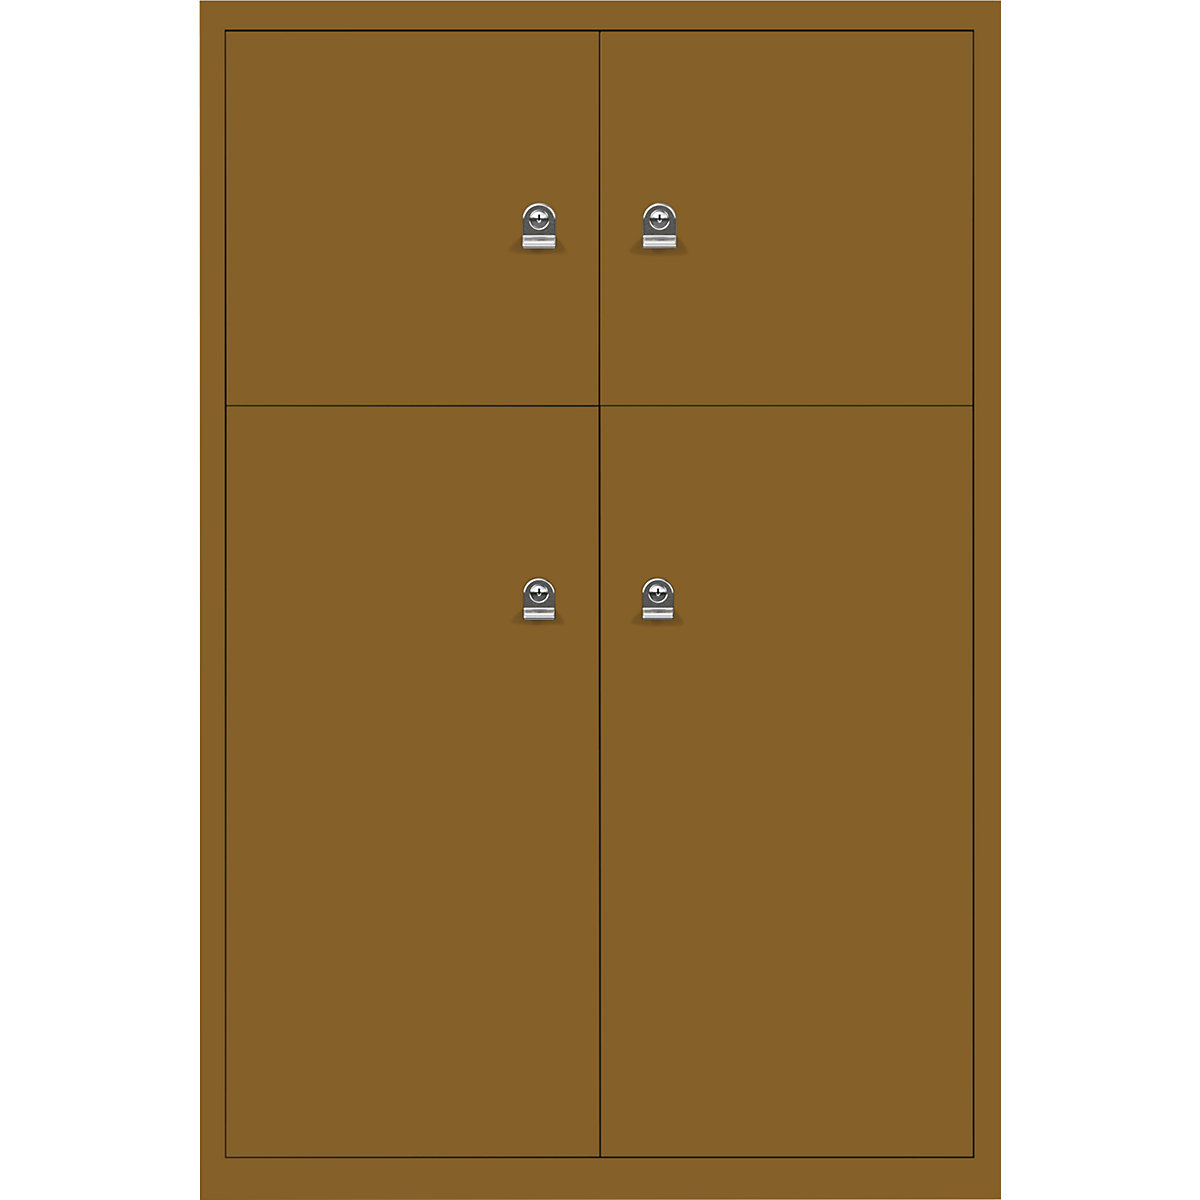 BISLEY – LateralFile™ lodge, with 4 lockable compartments, height 2 x 375 mm, 2 x 755 mm, dijon